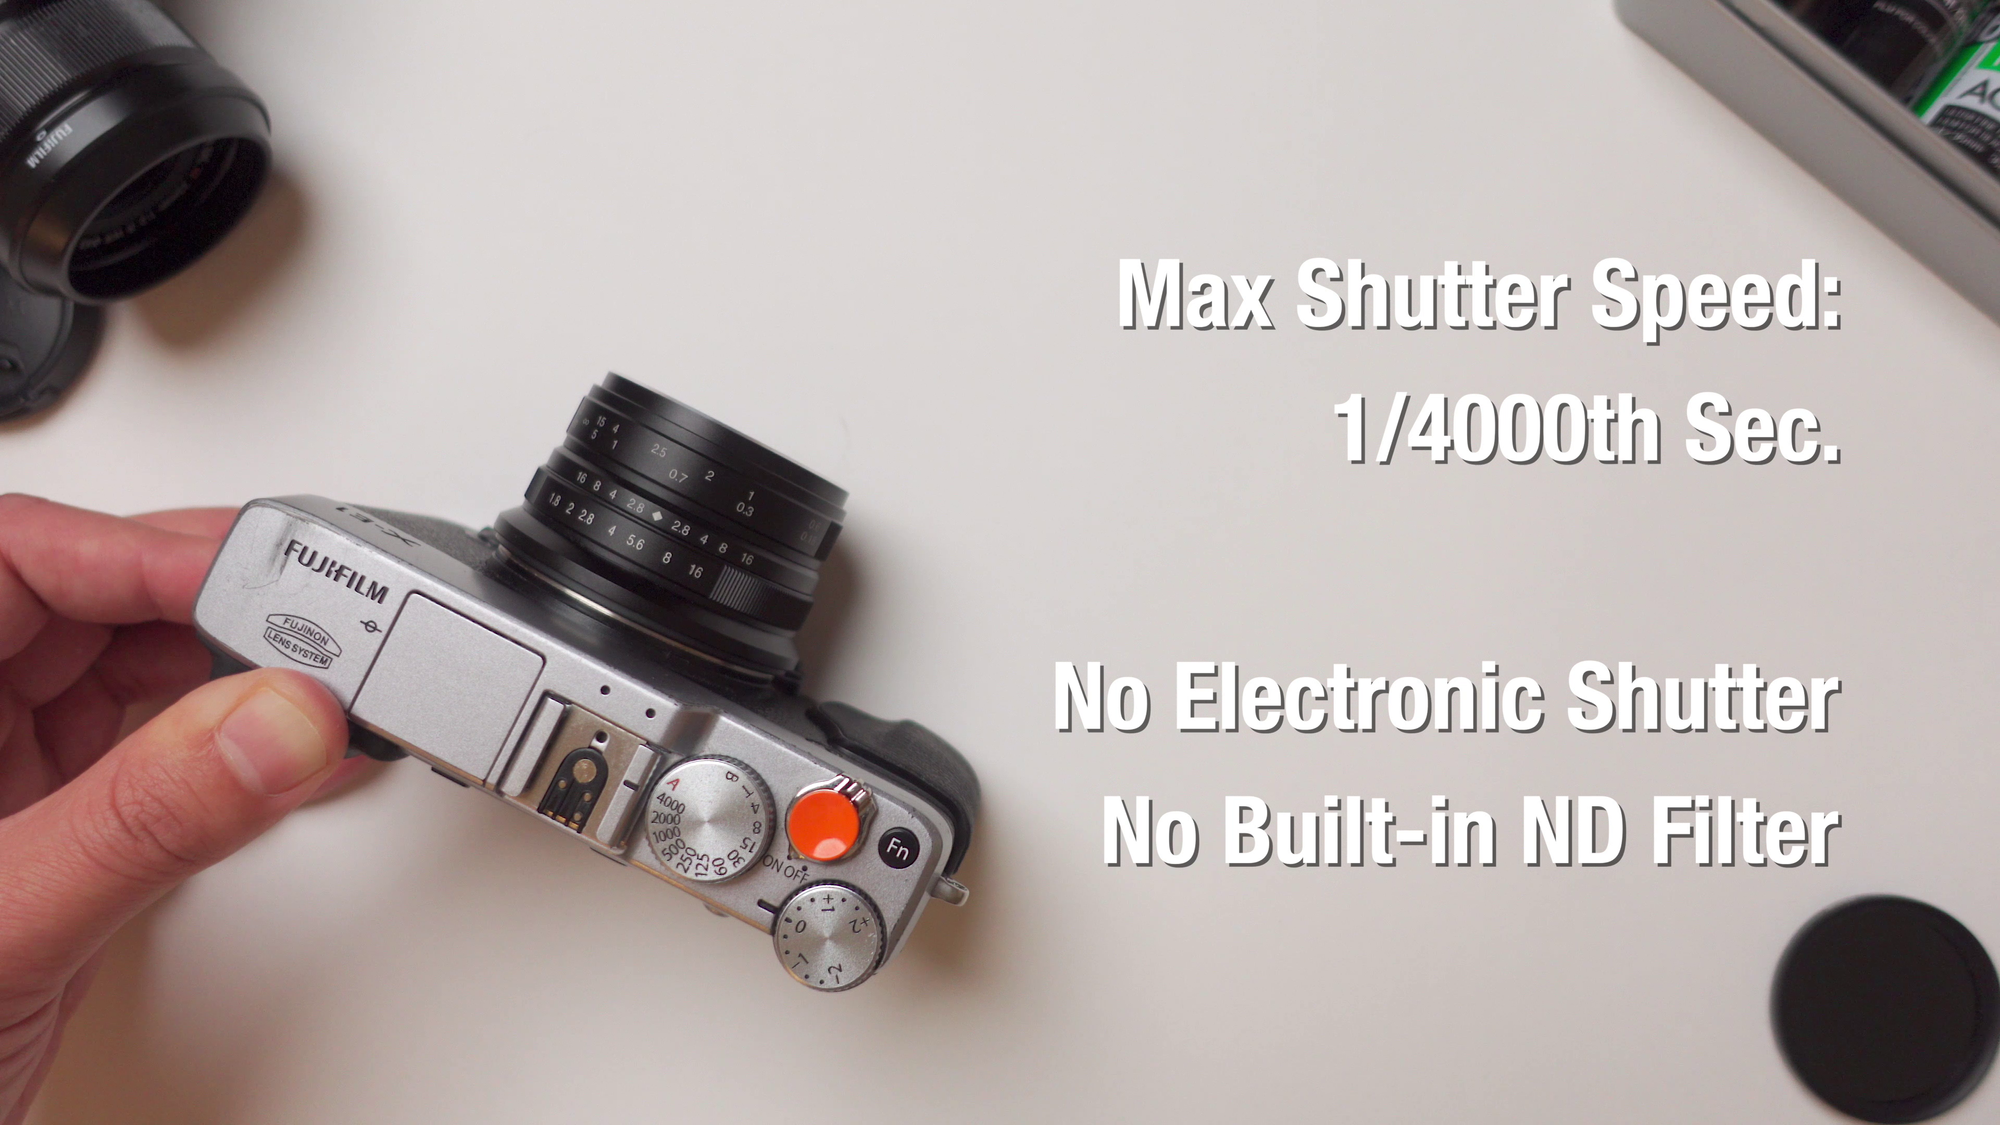 Fujifilm X-E1 In 2022 - Review With Samples